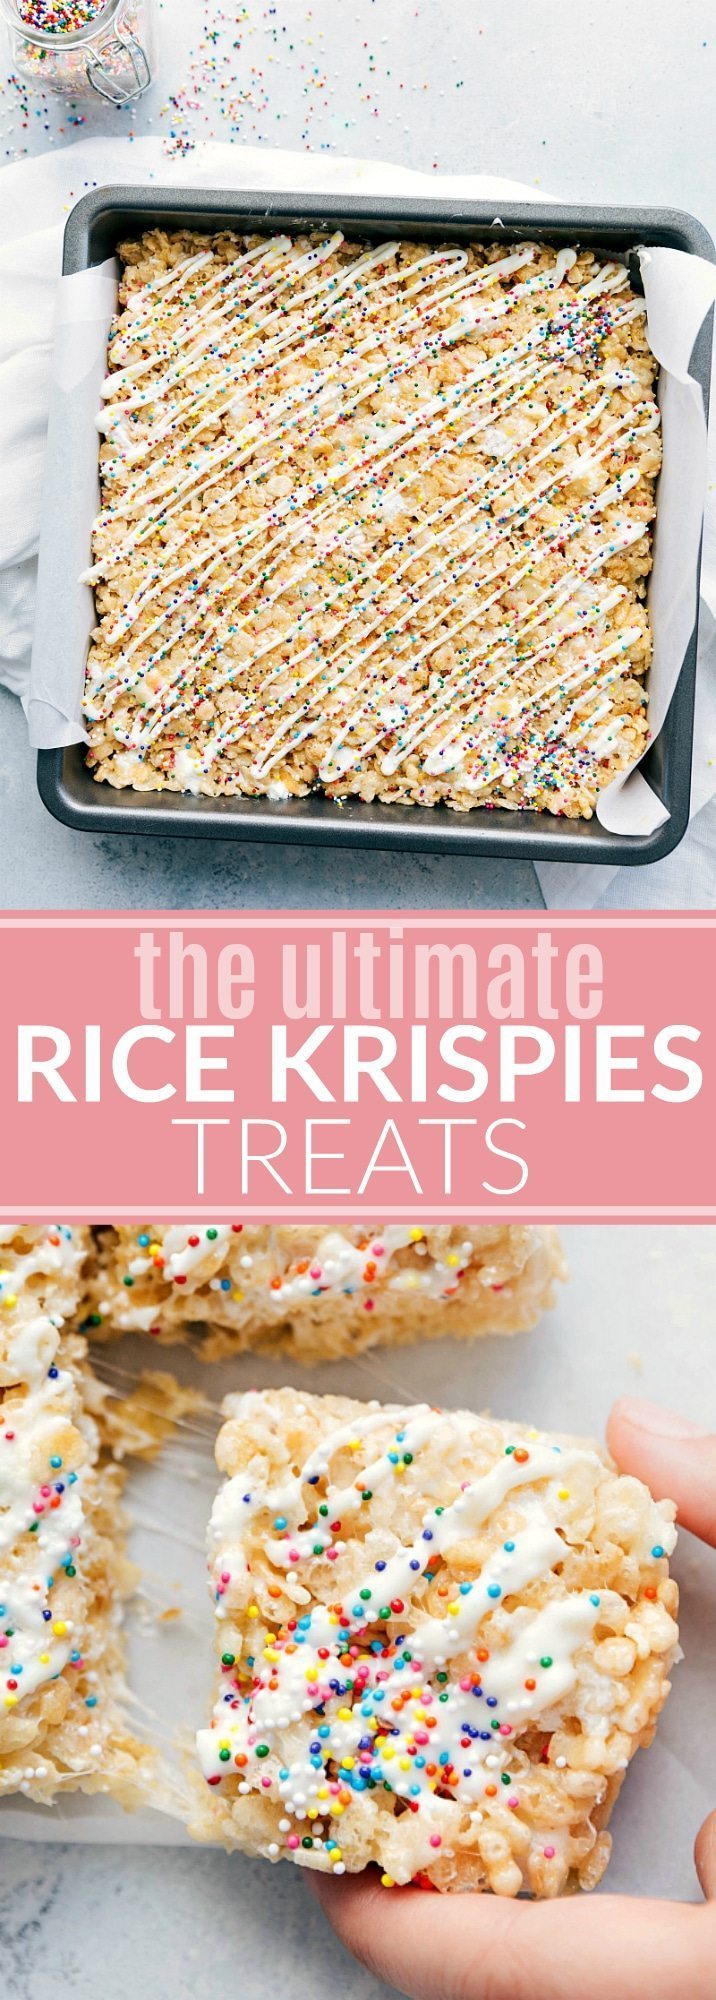 The ultimate BEST EVER Rice Krispies Treats! Read the rave reviews!! via chelseasmessyapron.com